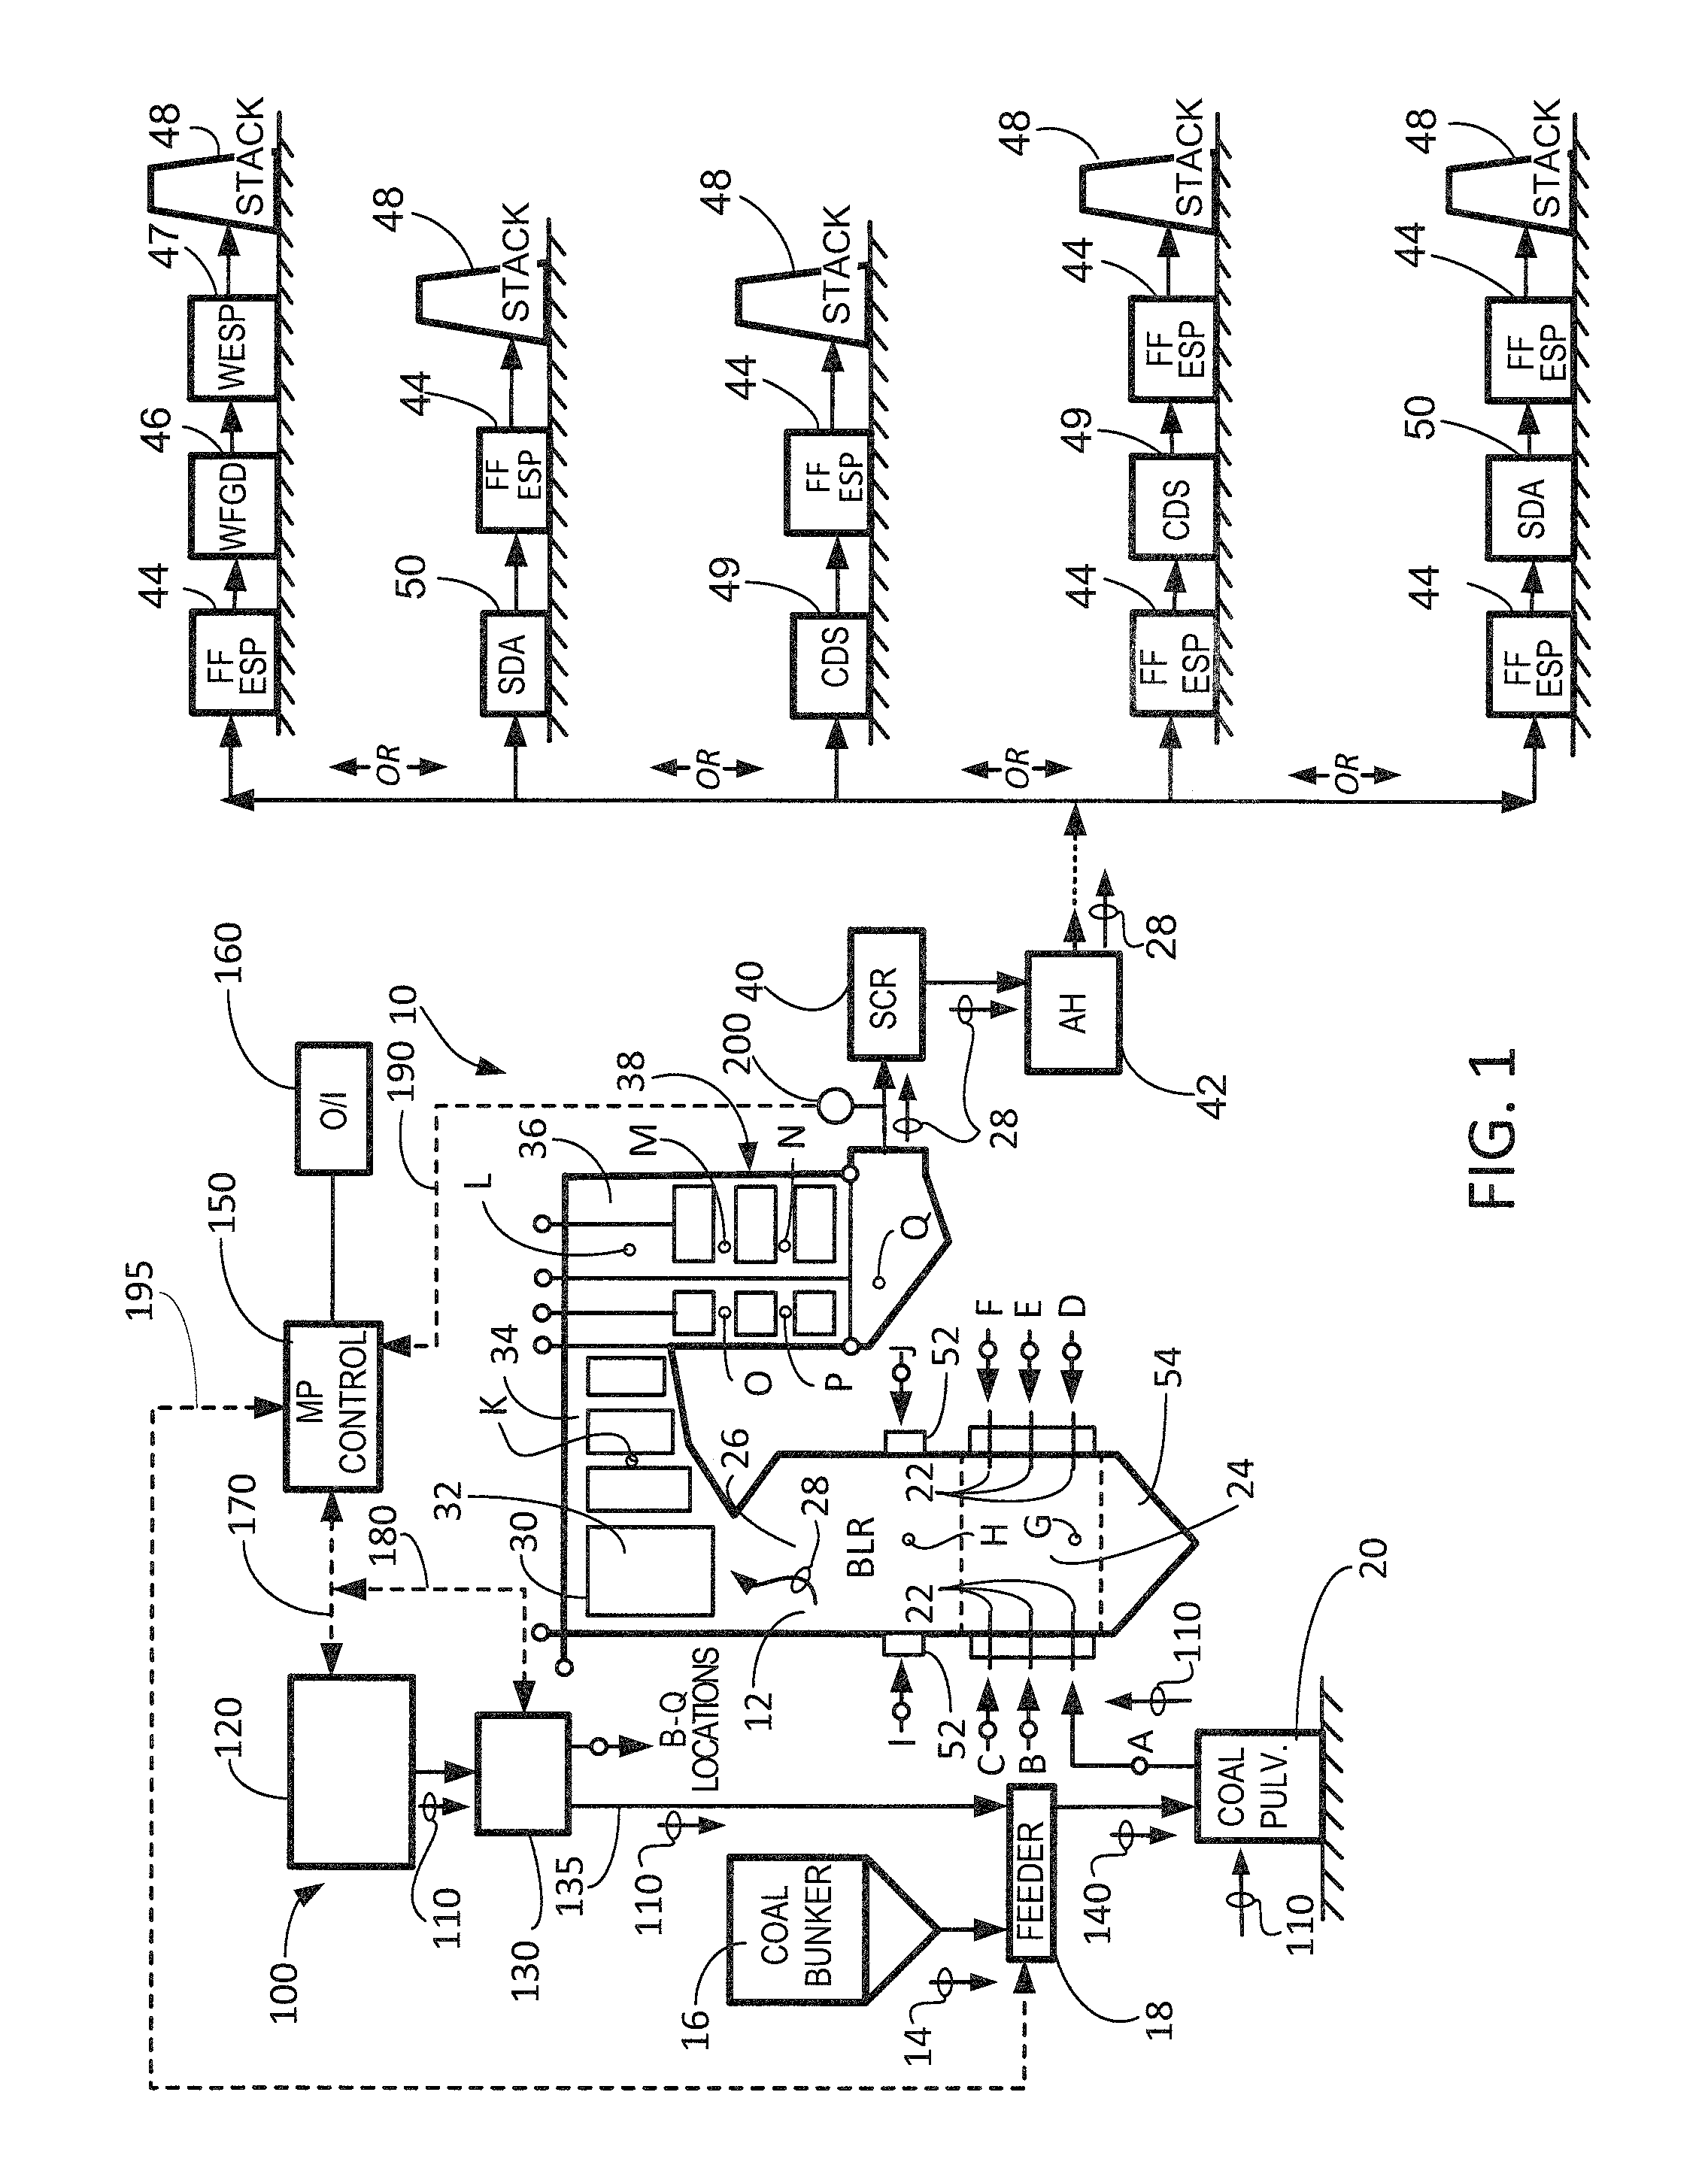 System and method for reducing halogen levels necessary for mercury control, increasing the service life and/or catalytic activity of an scr catalyst and/or control of multiple emissions